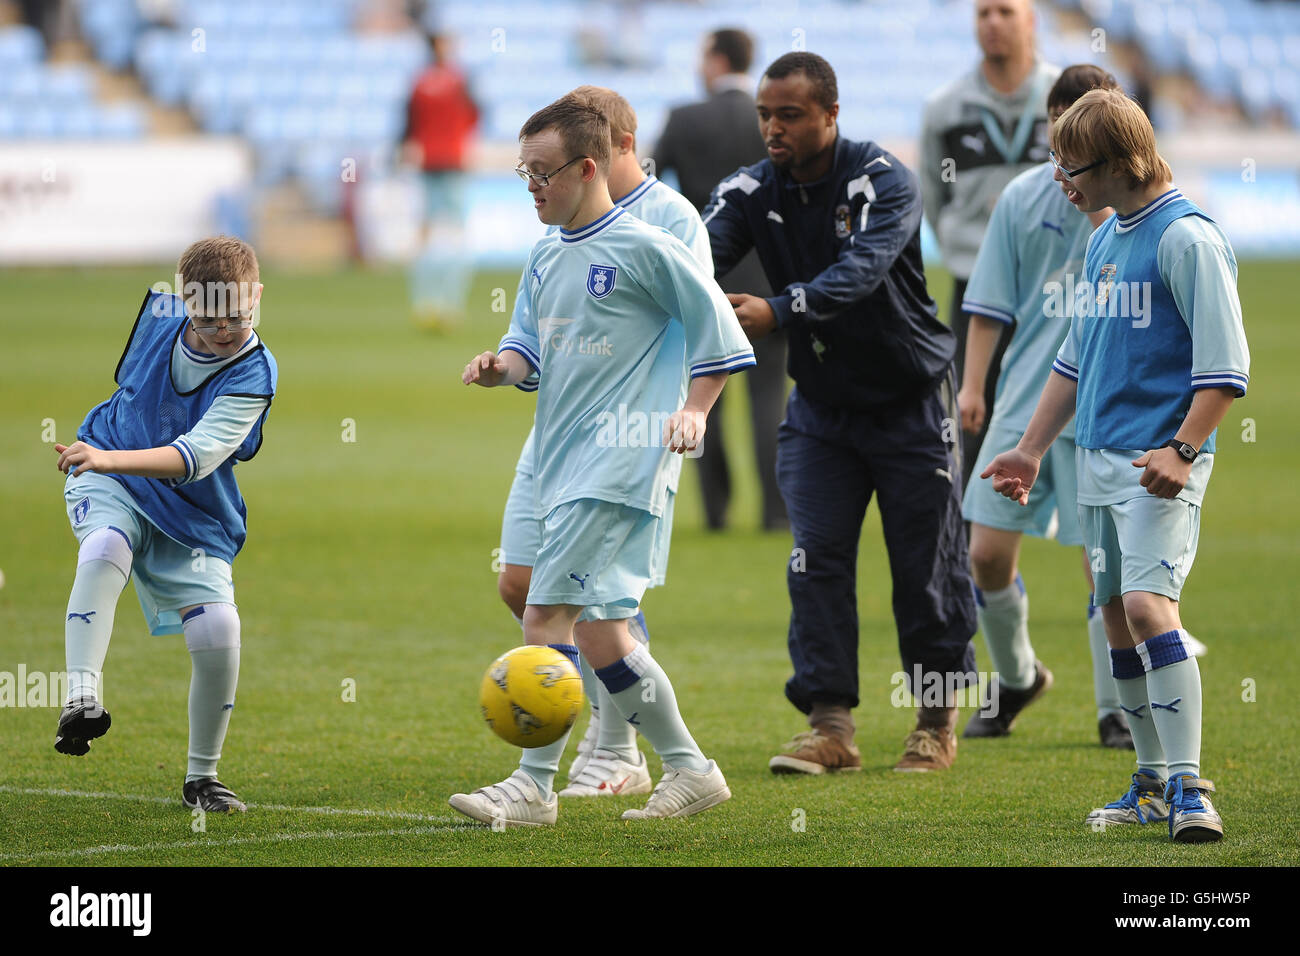 Coventry City Downs Syndrome team on the pitch at half time during the npower Football League One match at the Ricoh Arena, Coventry. Stock Photo